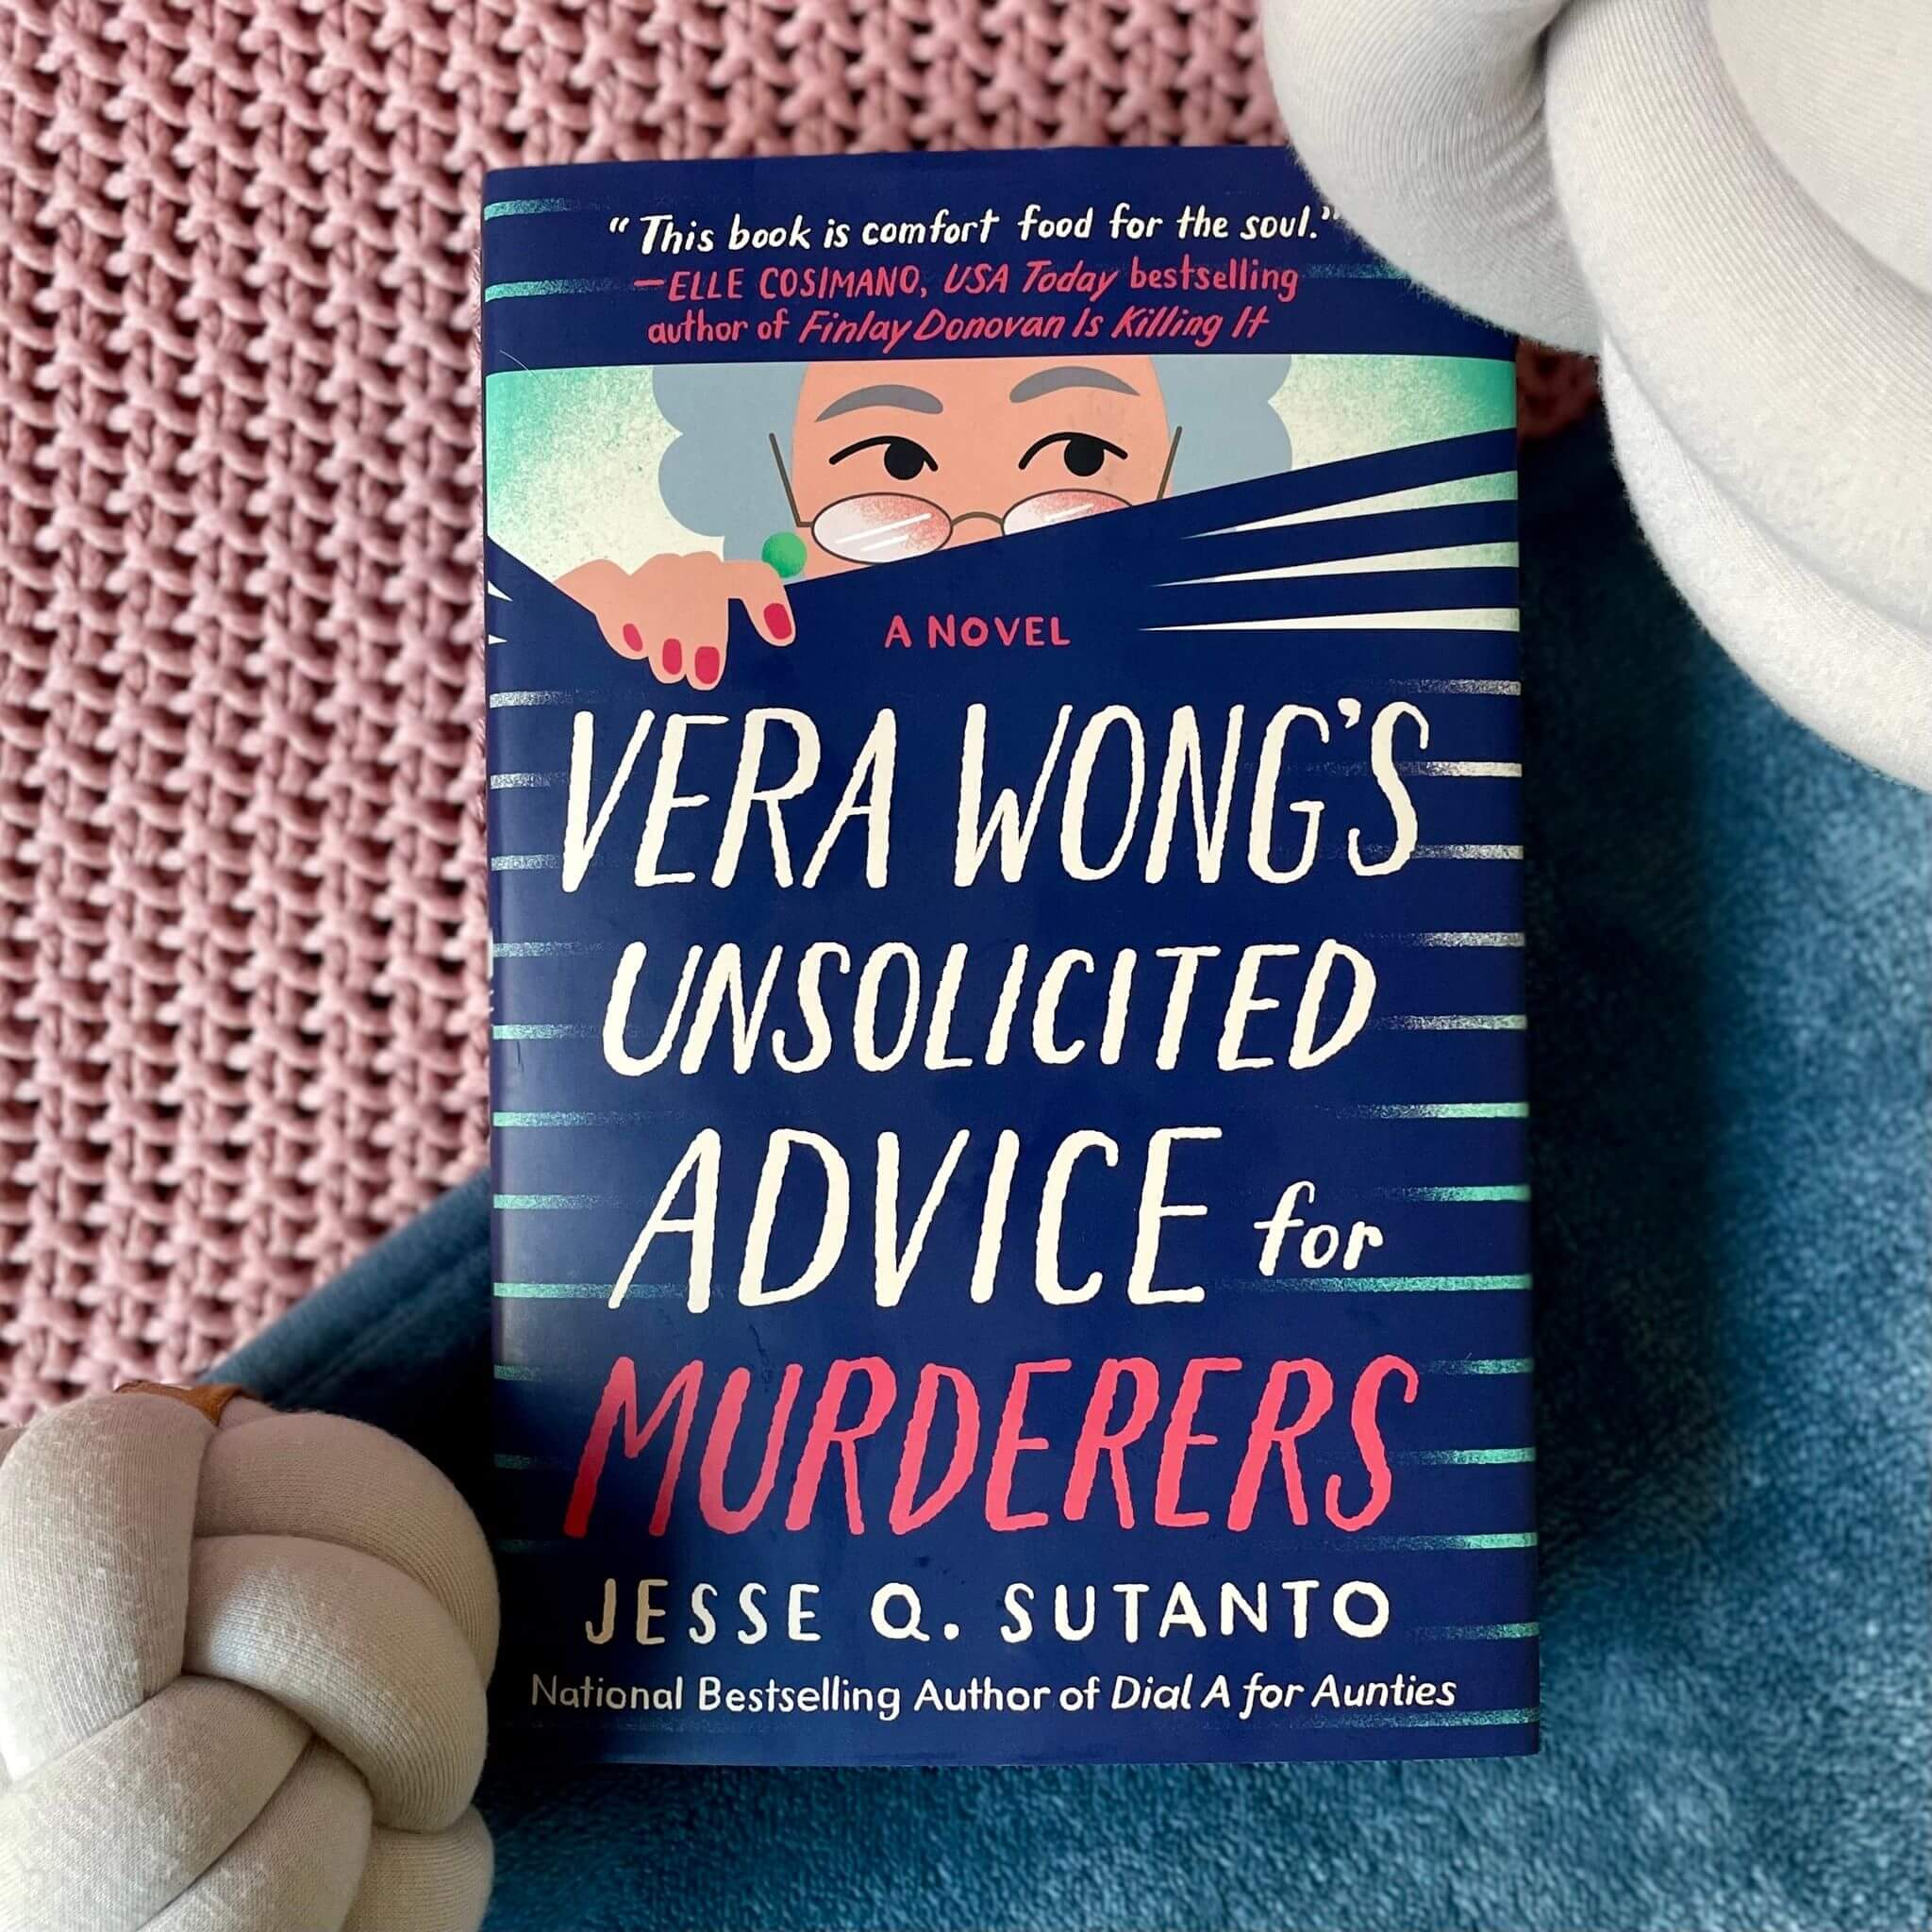 Vera Wong's Unsolicited advice for murderers